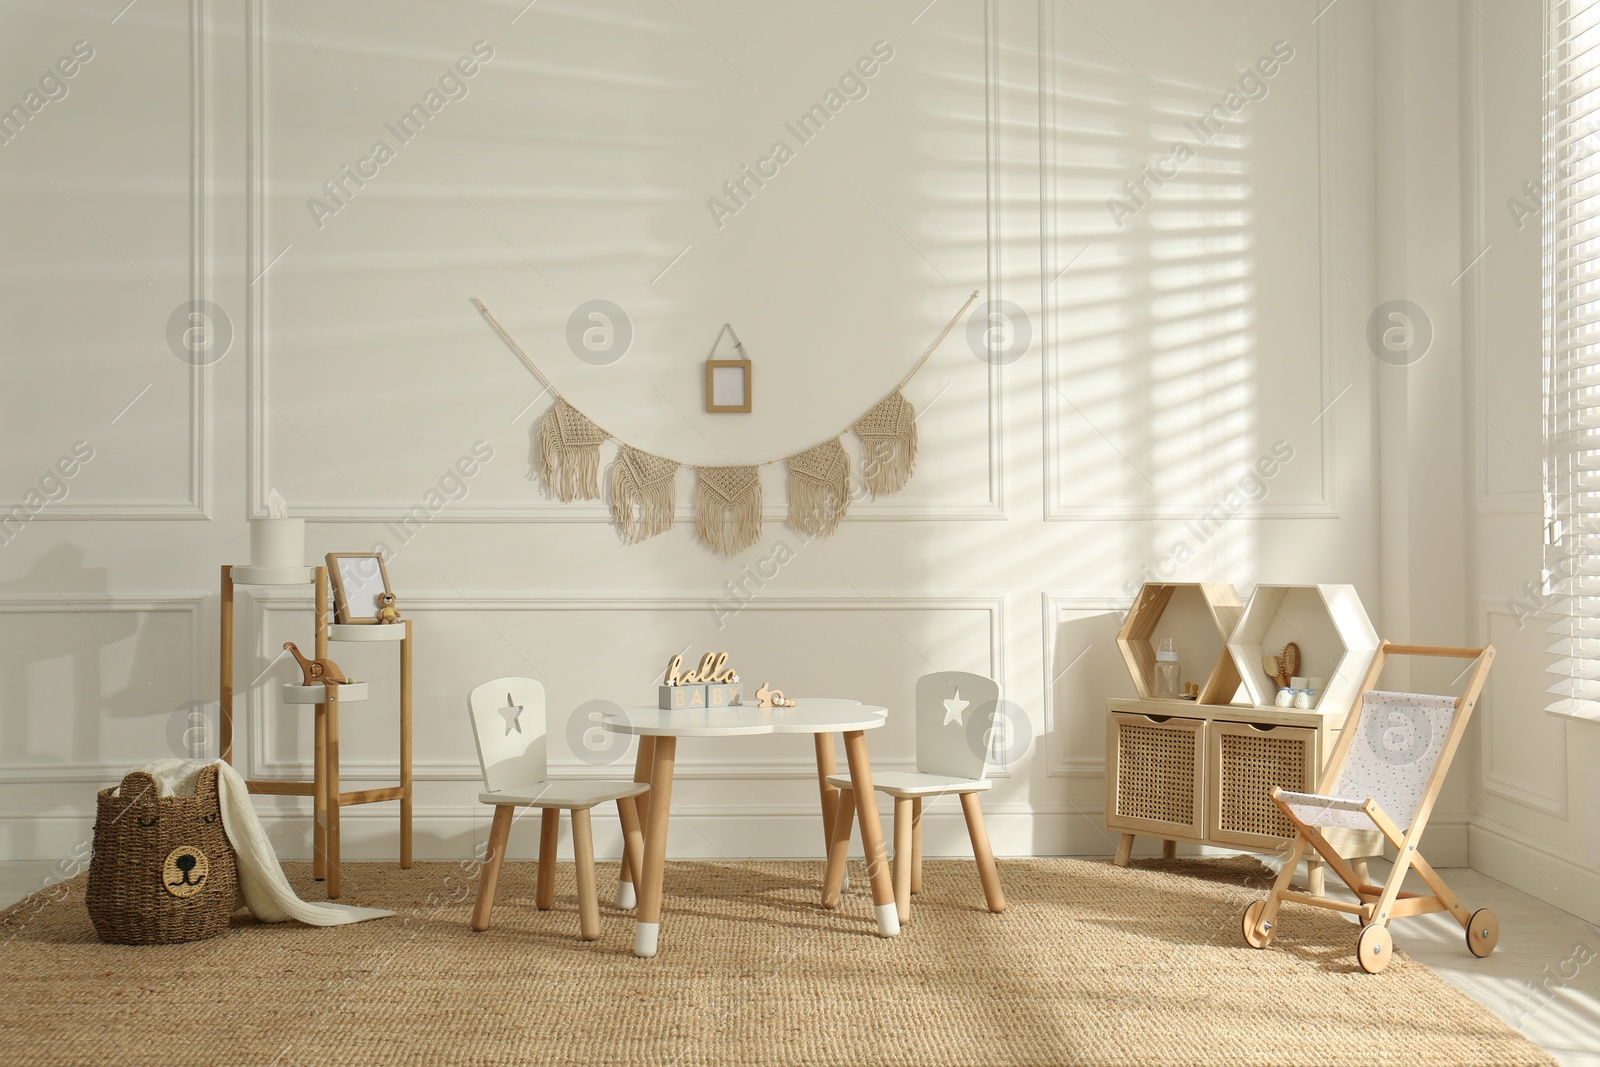 Photo of Modern child room interior with stylish furniture and accessories